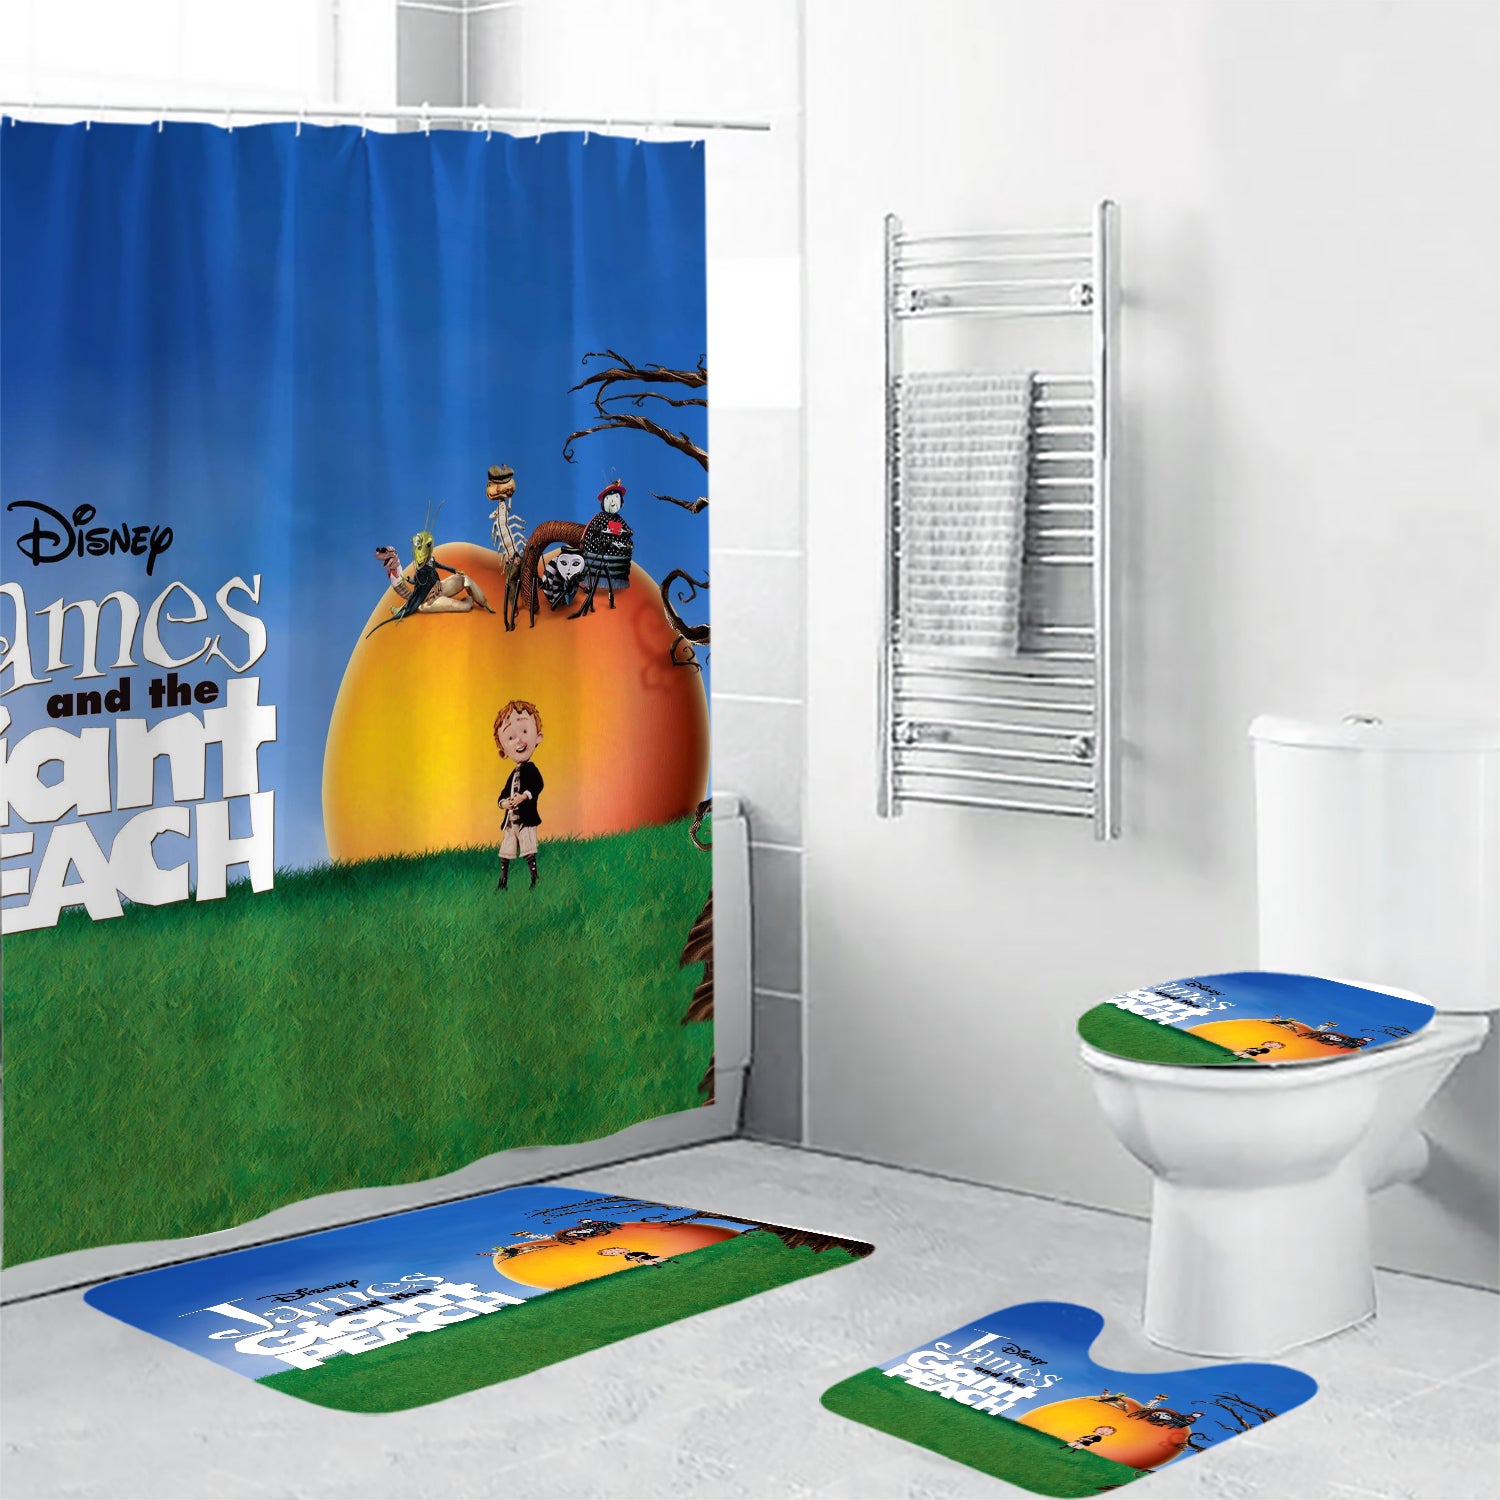 James and the Giant Peach Poster 7 4PCS Shower Curtain Non-Slip Toilet Lid Cover Bath Mat - Bathroom Set Fans Gifts